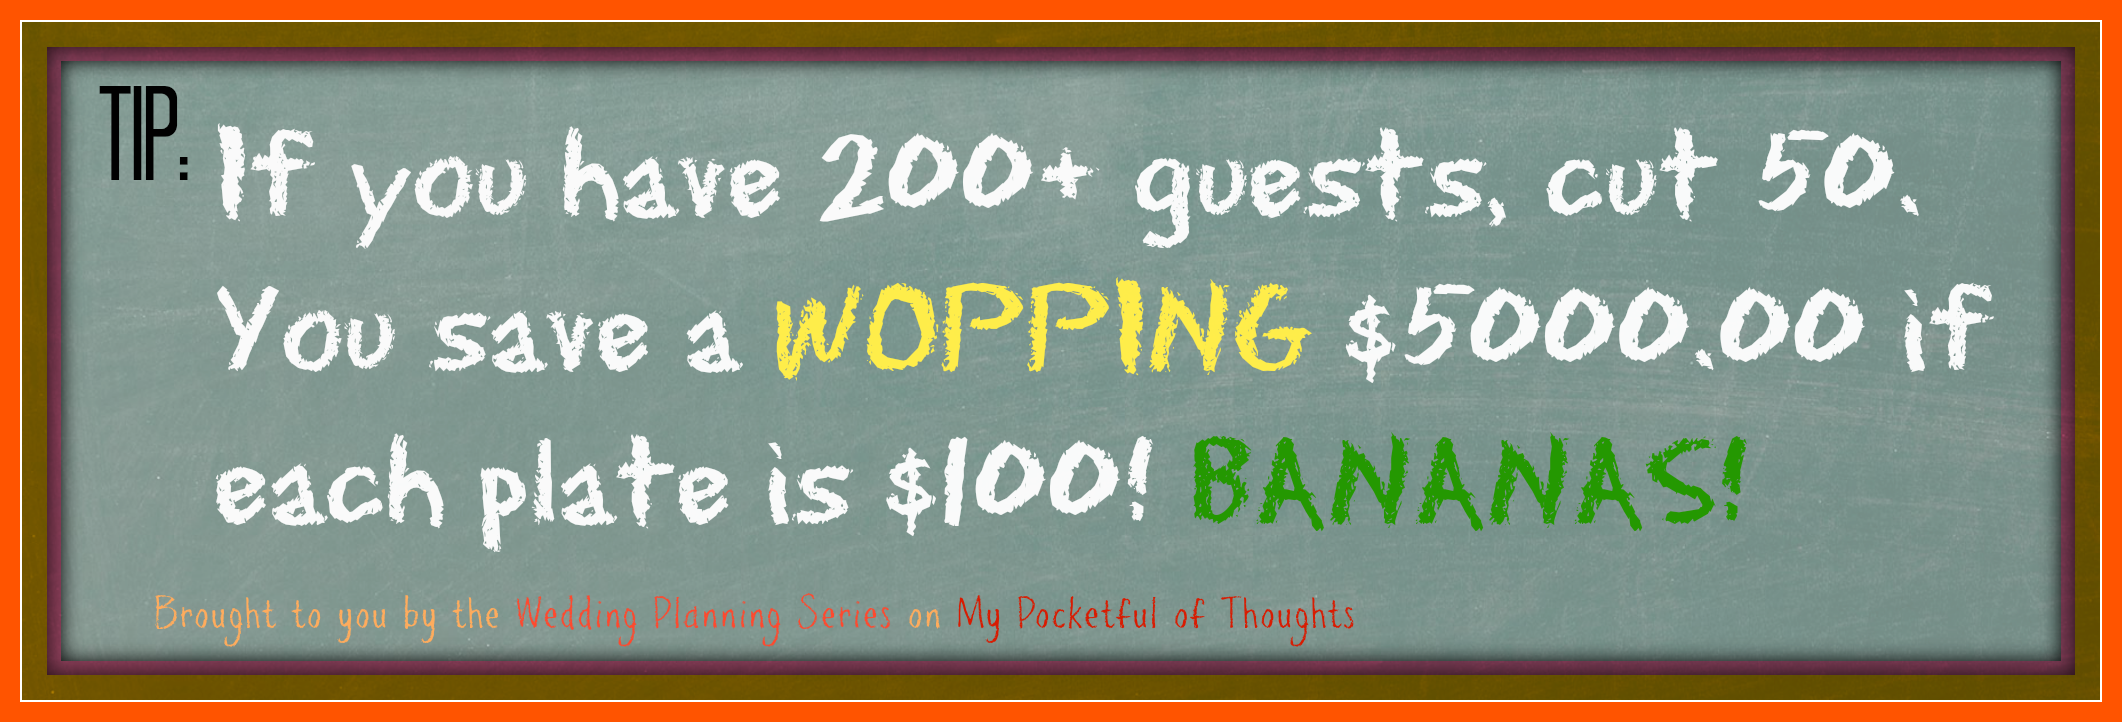 A tip on how to save $5000 on your wedding! Part of the my Pocketful of Thoughts Wedding Planning Series